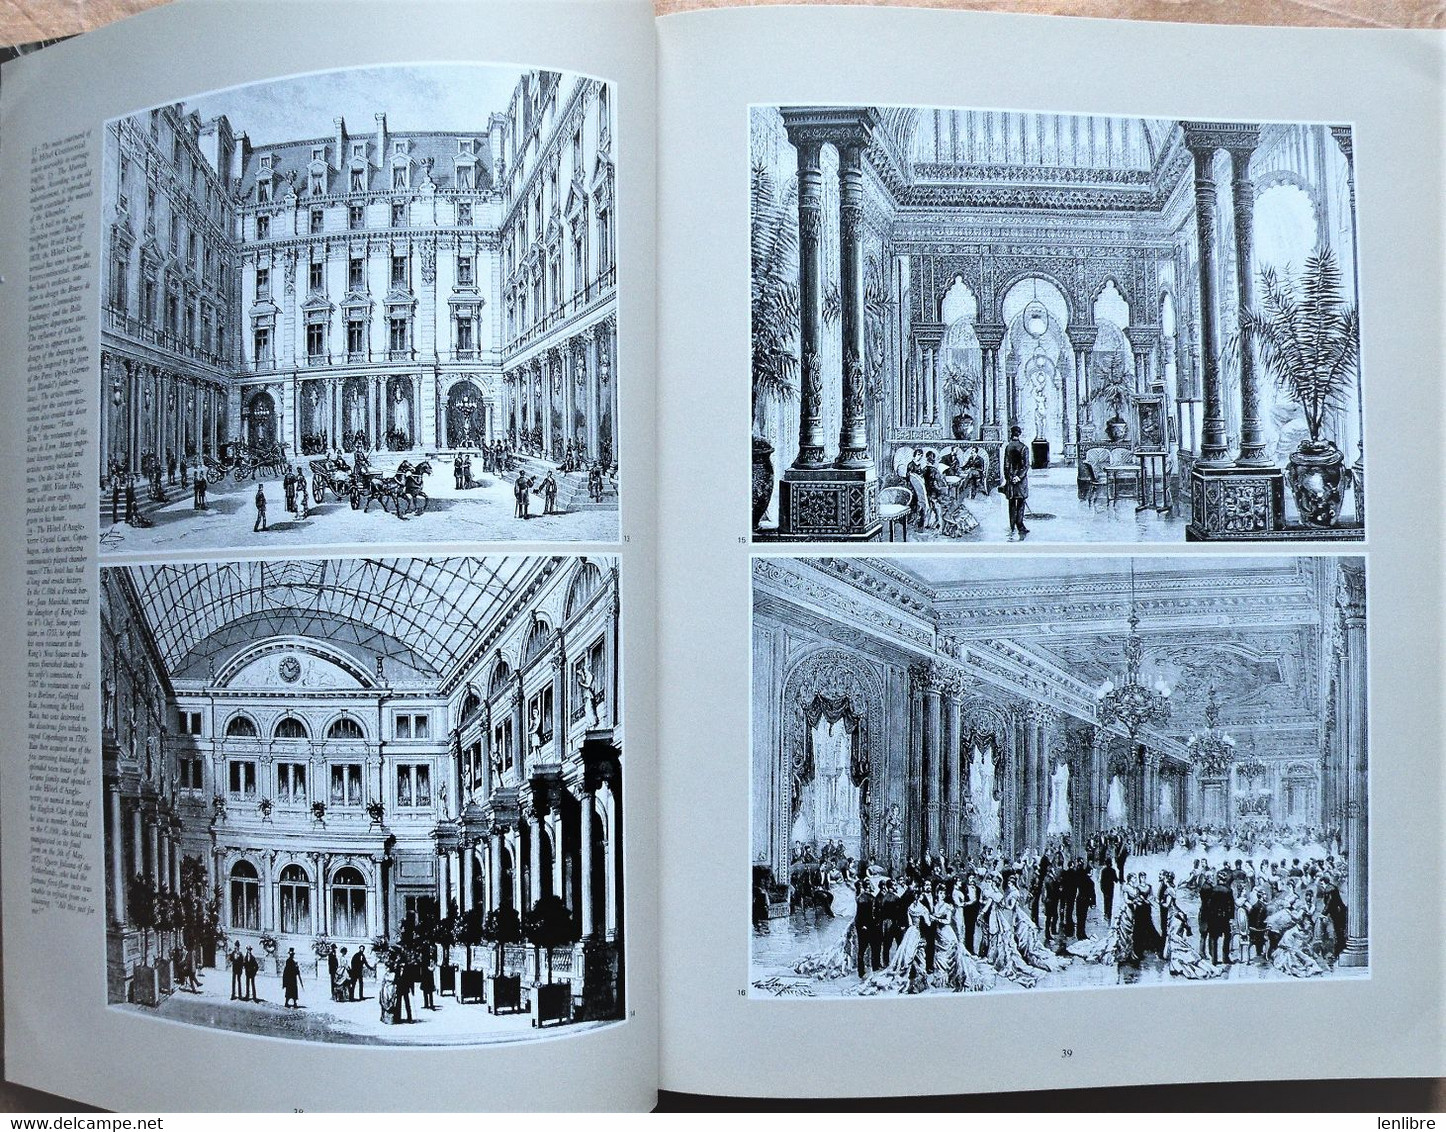 GRAND HOTEL, The Golden Age Of Palace Hotels, An Architectural And Social. 1984. - Cultural